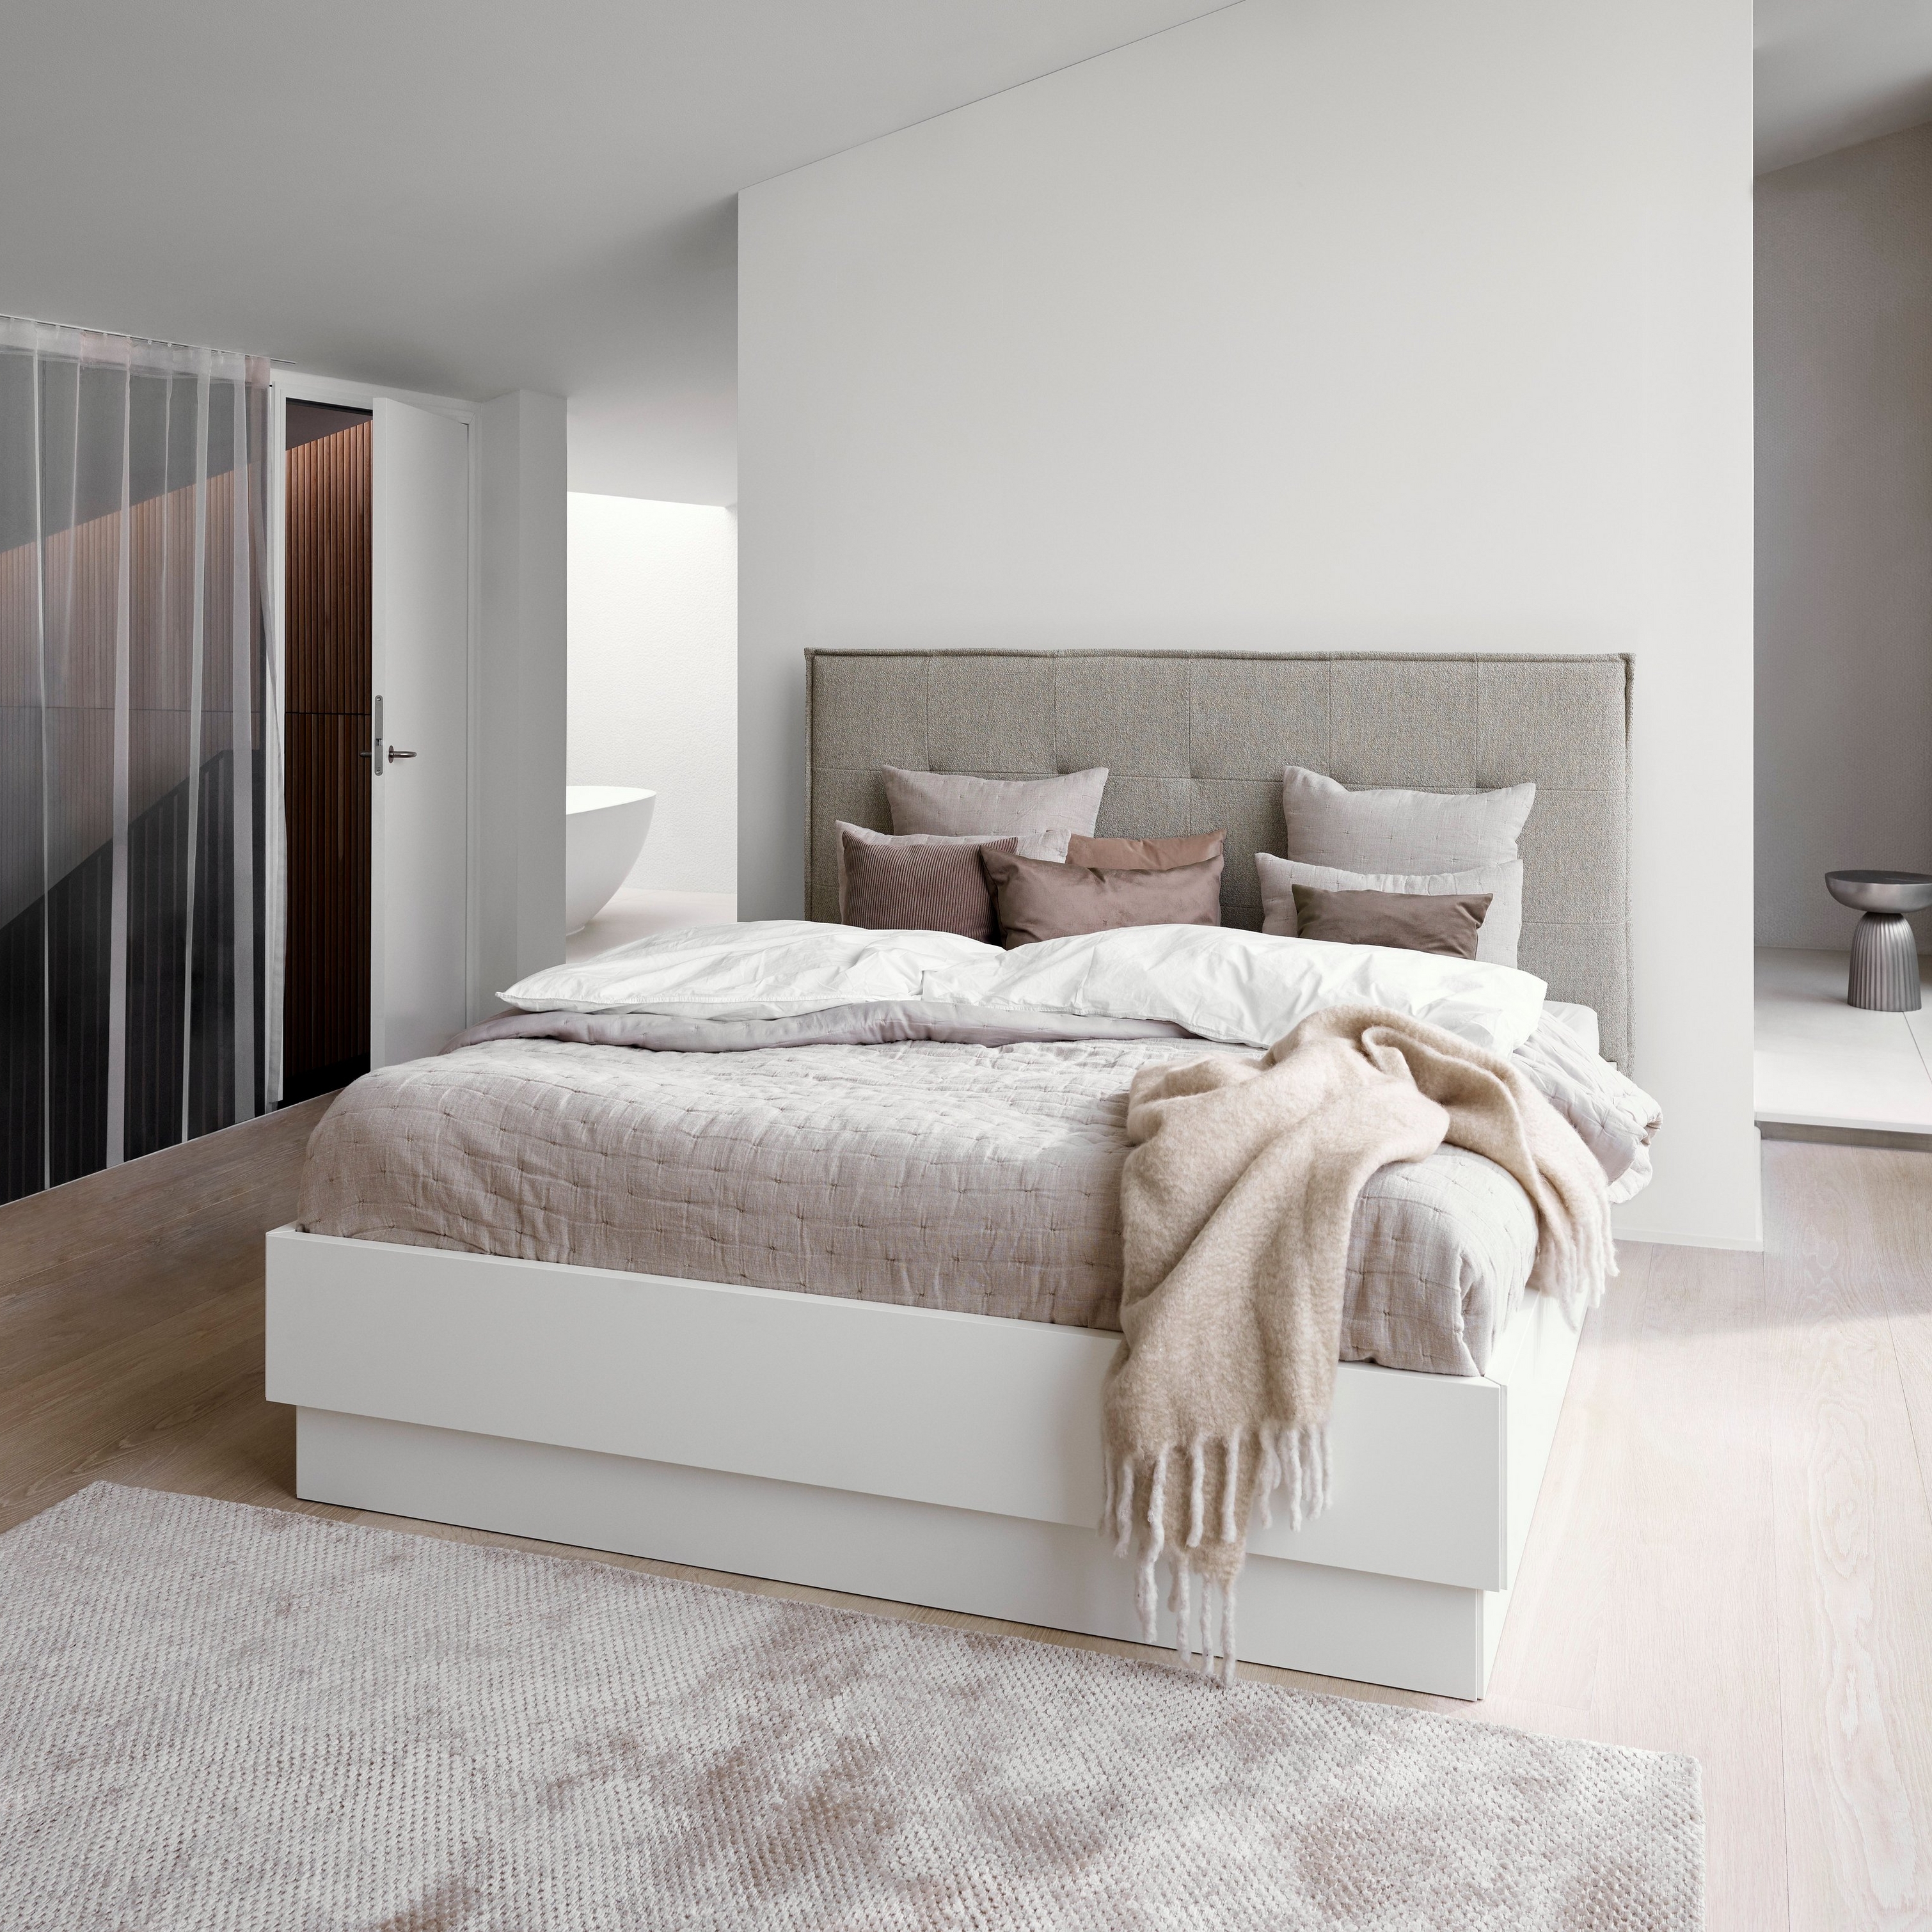 Minimalist bedroom with a gray upholstered bed, white linens, and a textured beige throw.